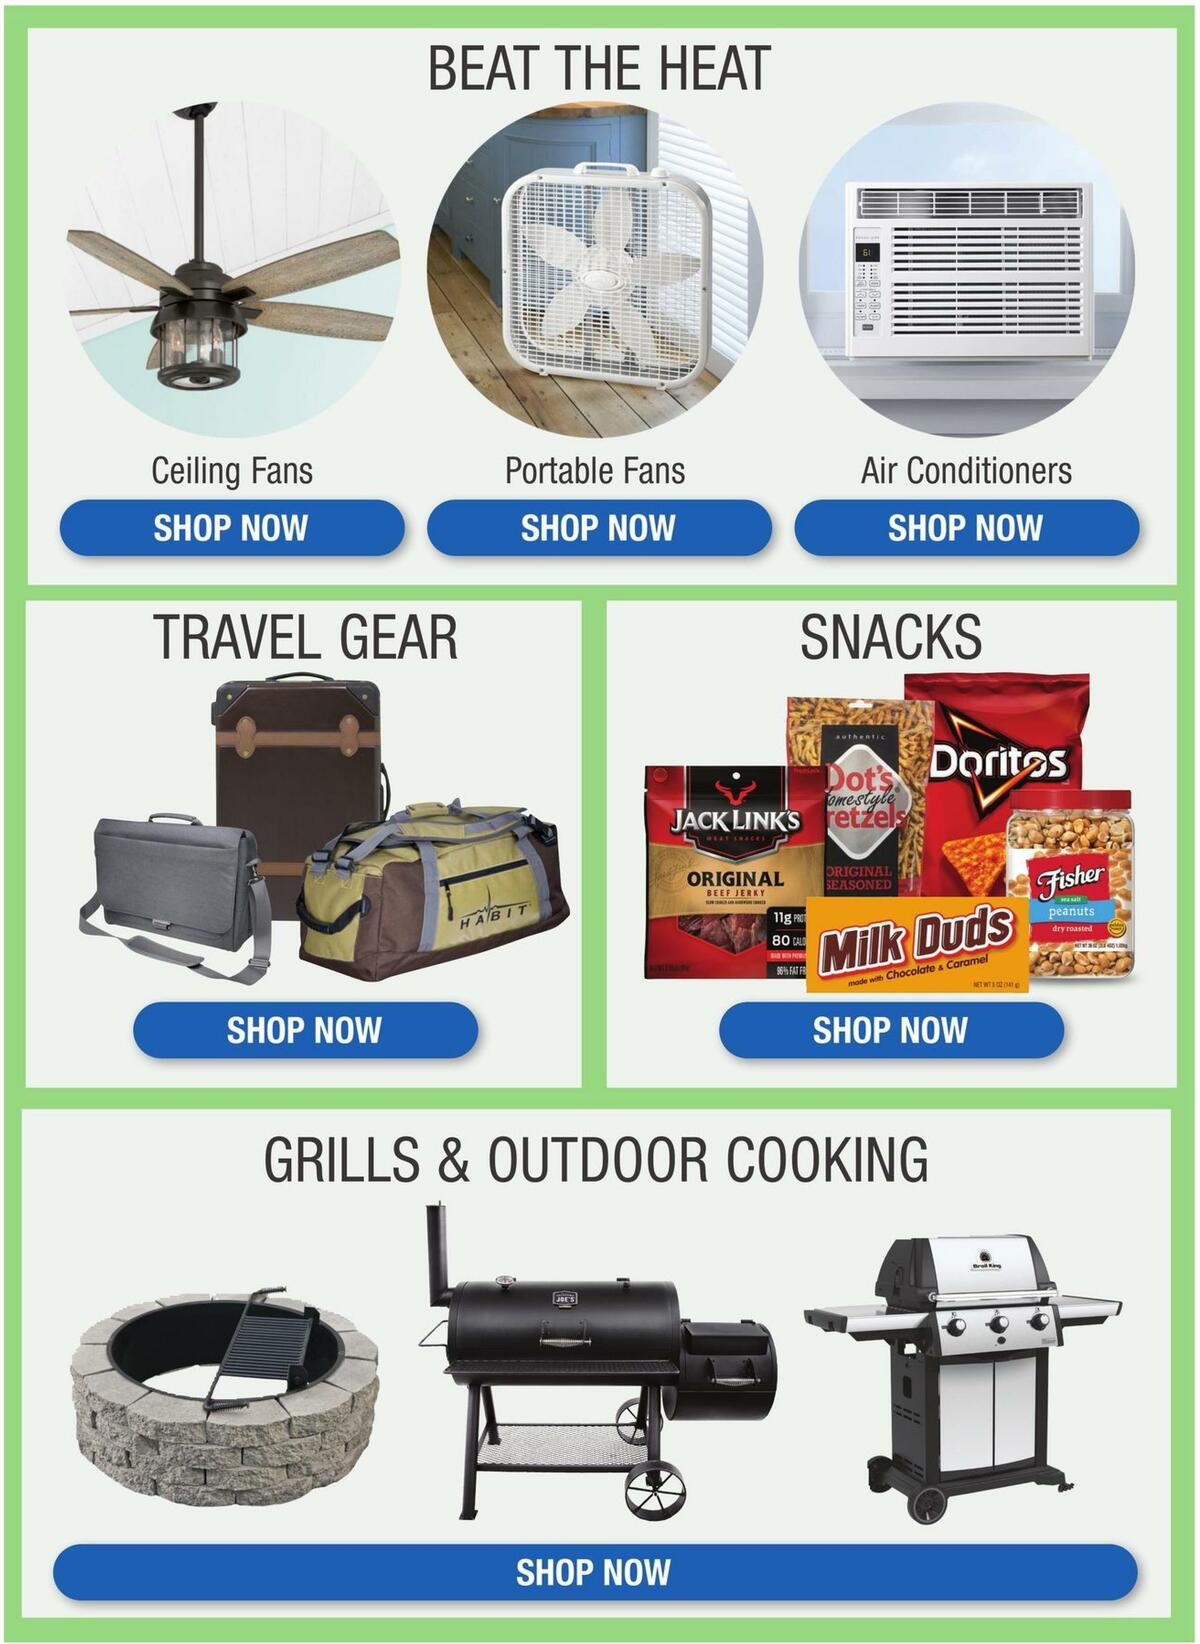 Menards Weekly Ad from August 5